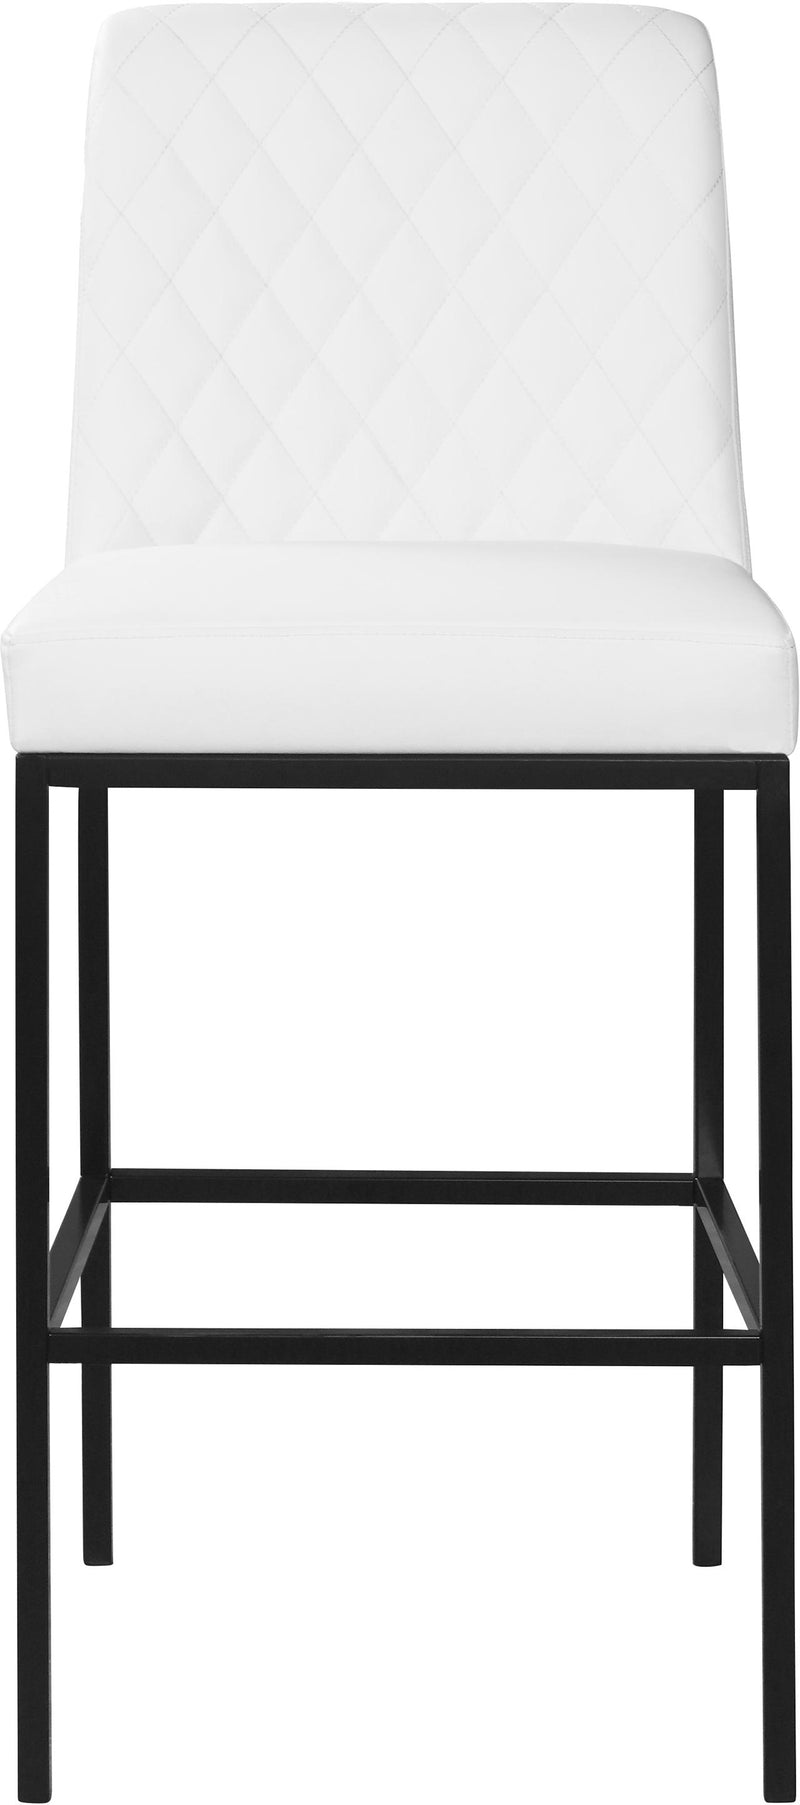 Bryce White Faux Leather Stool